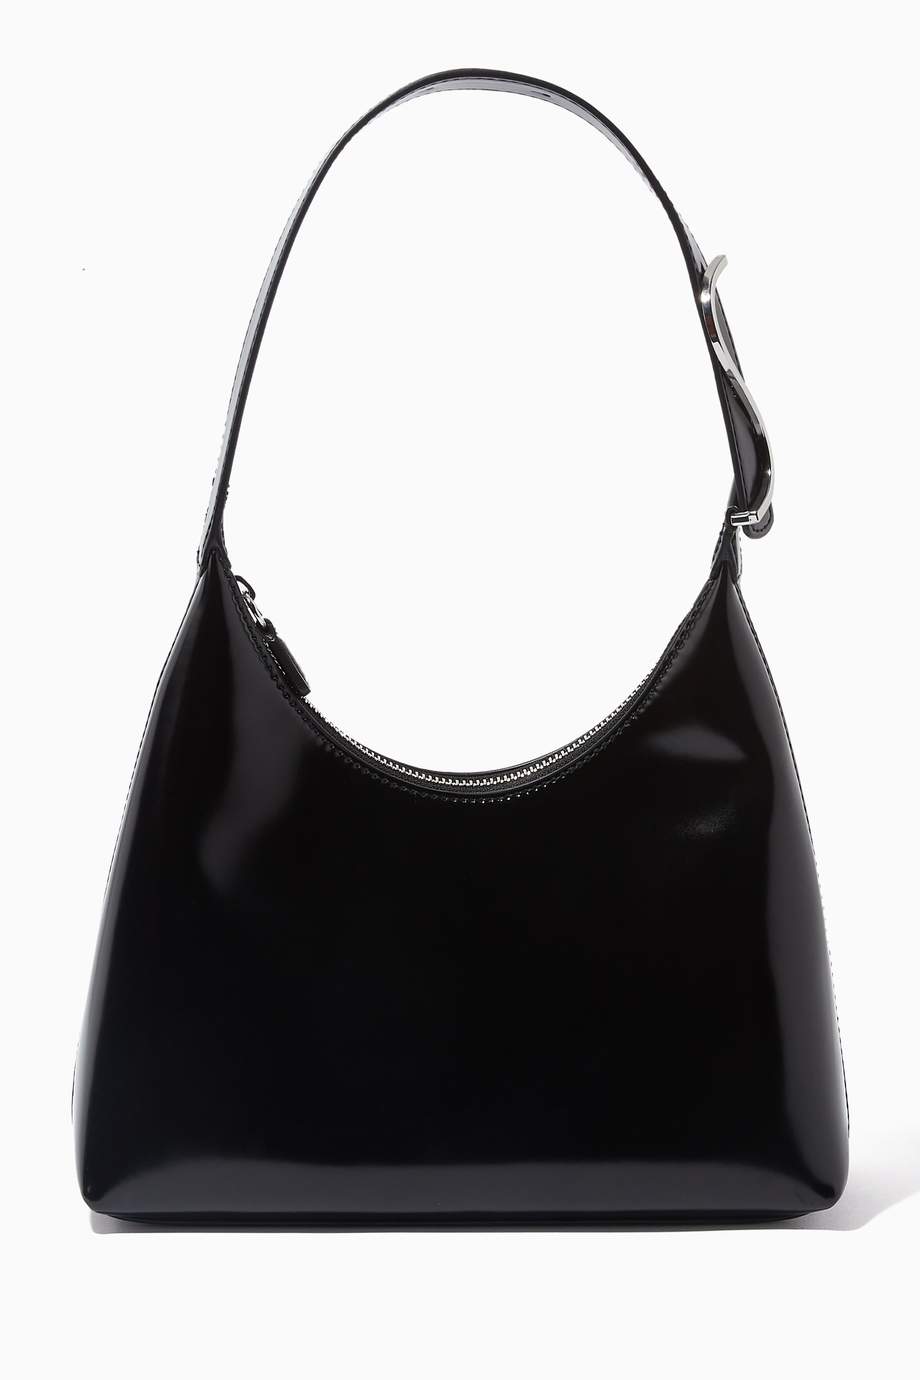 Shop Staud Black Scotty Bag in Polished Calf Leather for Women | Ounass UAE